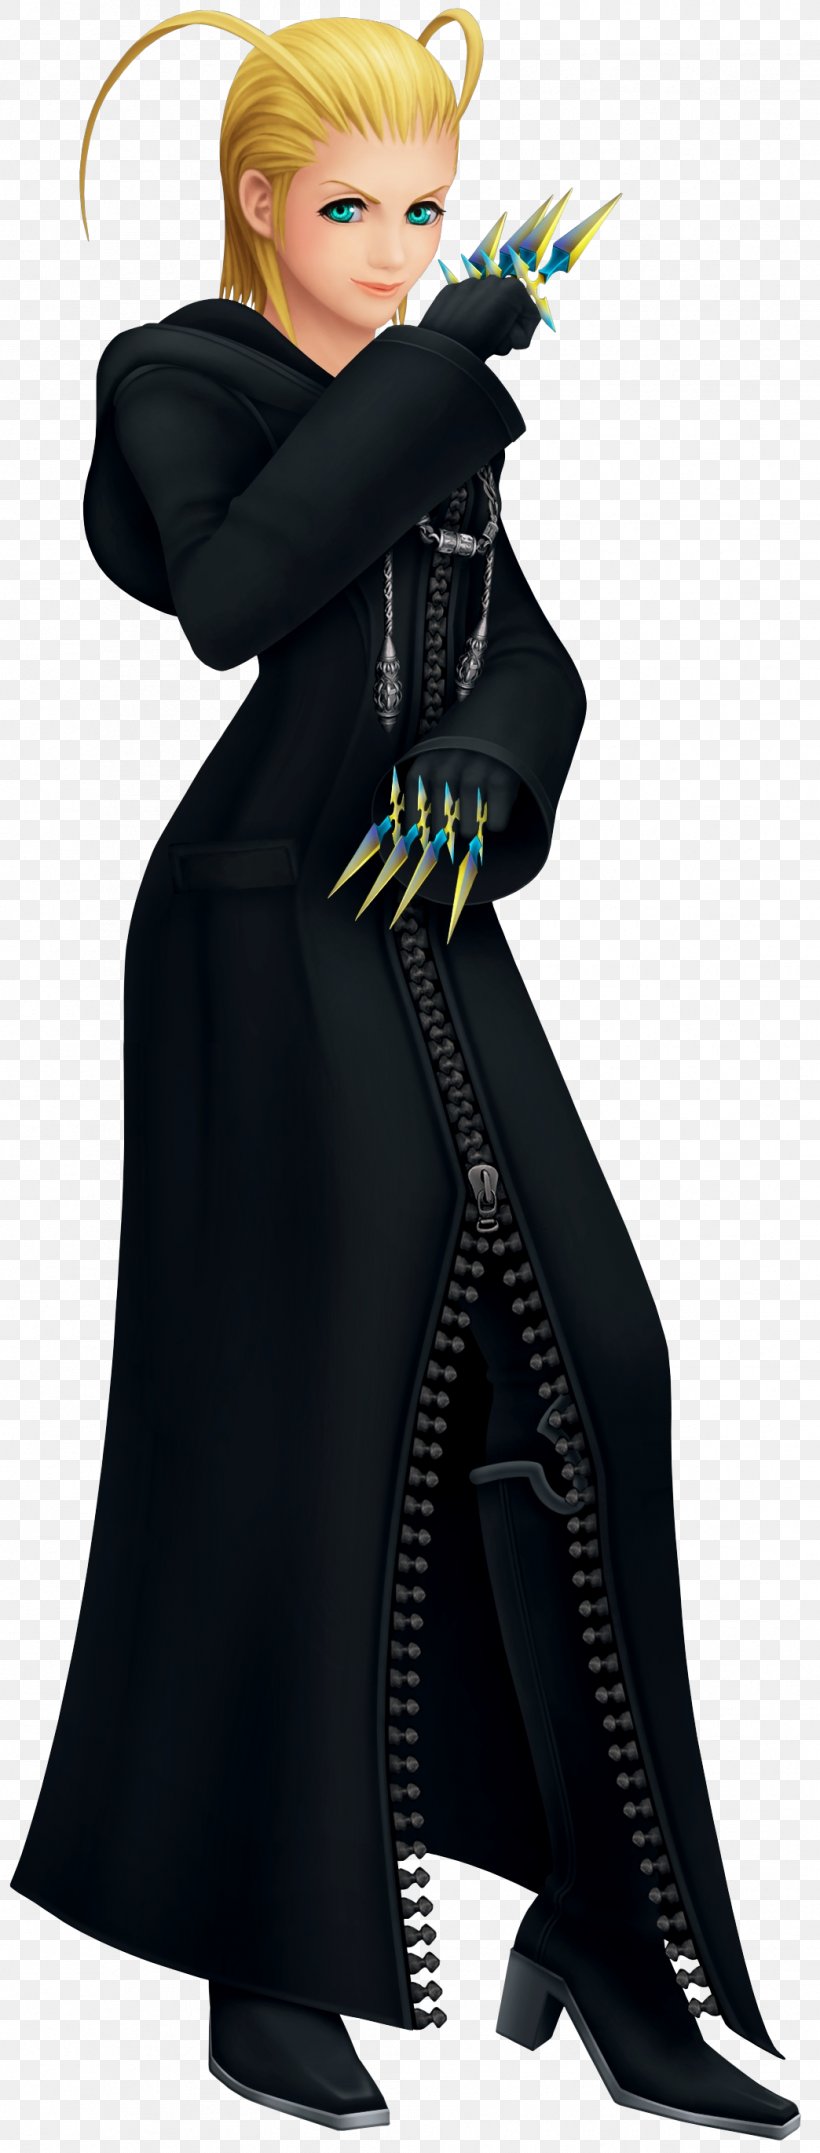 Shanelle Workman Kingdom Hearts: Chain Of Memories Kingdom Hearts II Kingdom Hearts 358/2 Days Organization XIII, PNG, 1044x2742px, Kingdom Hearts Chain Of Memories, Boss, Castle Oblivion, Characters Of Kingdom Hearts, Costume Download Free